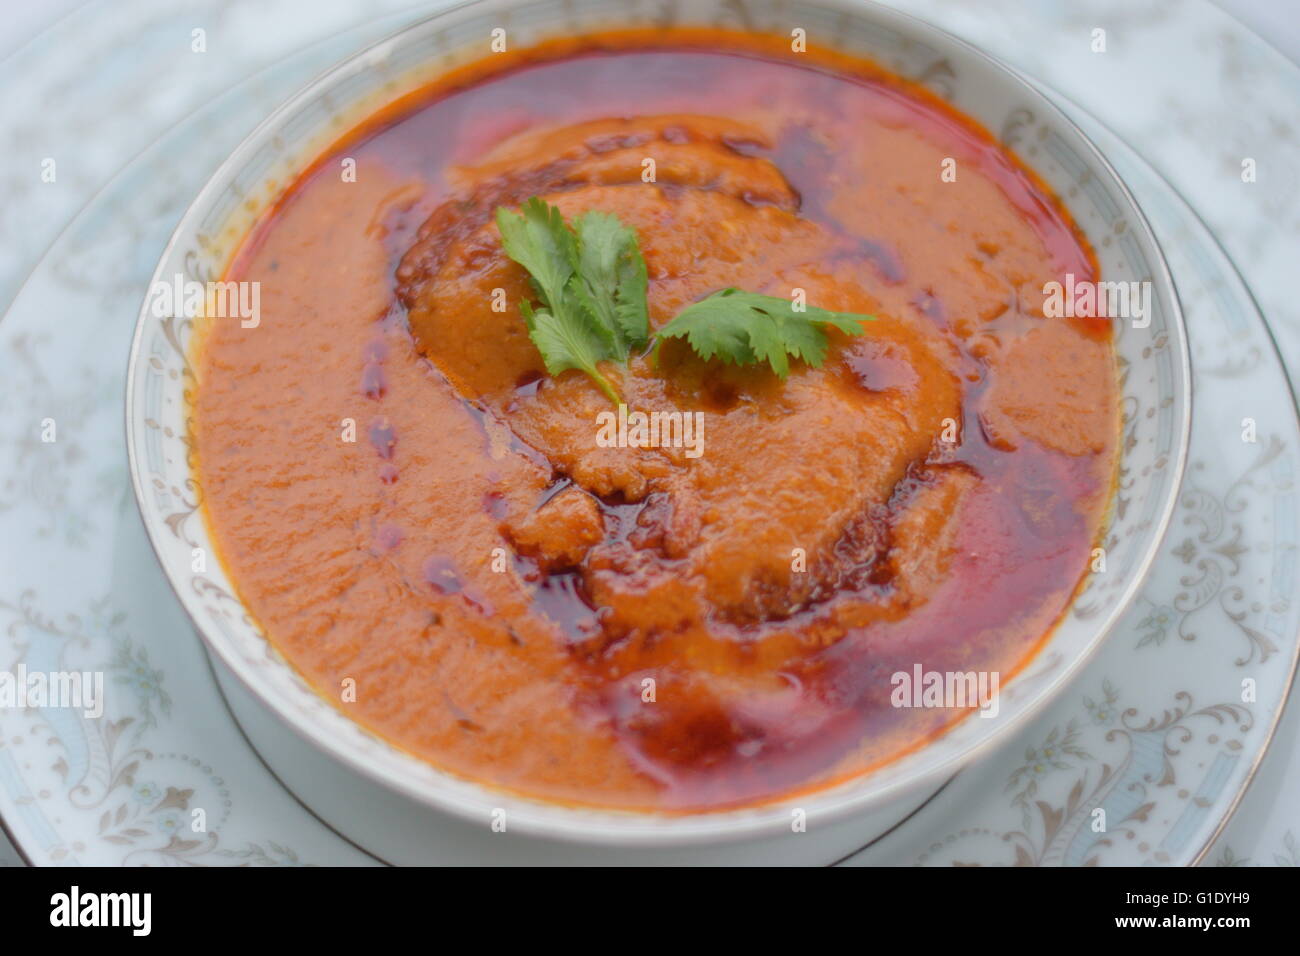 indian curry recipe dinner oily food Stock Photo